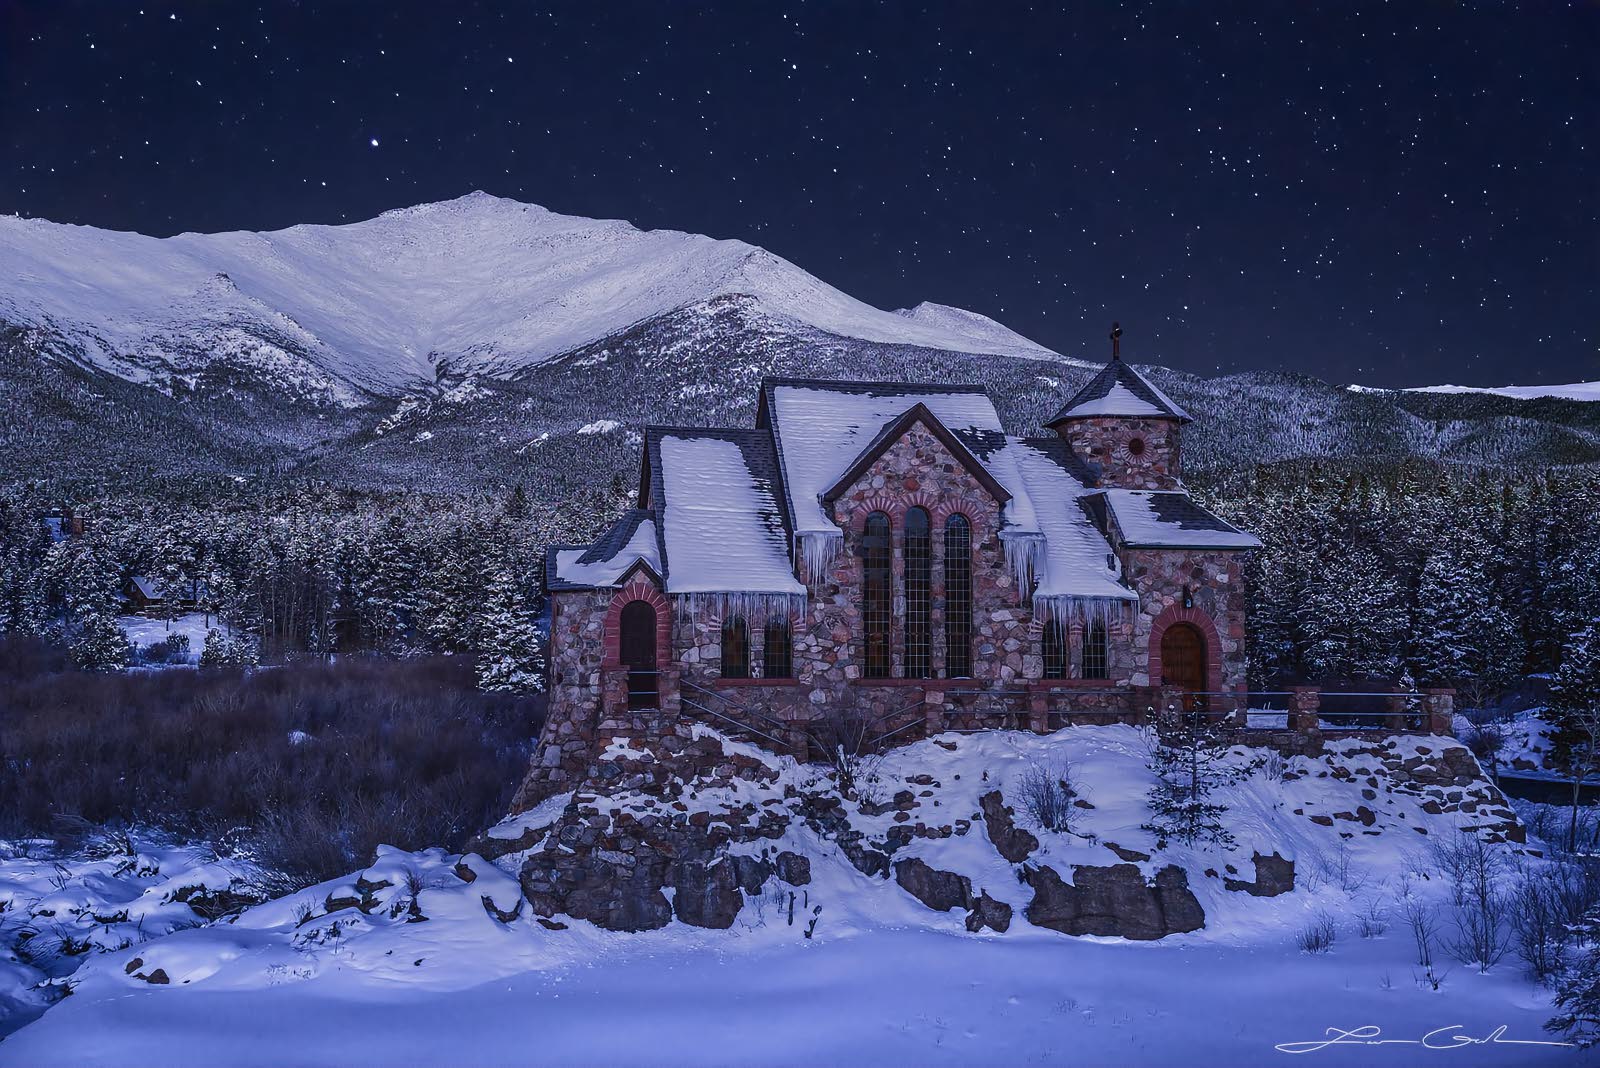 Charming stone church at the base of a mountain on a winter night under stars